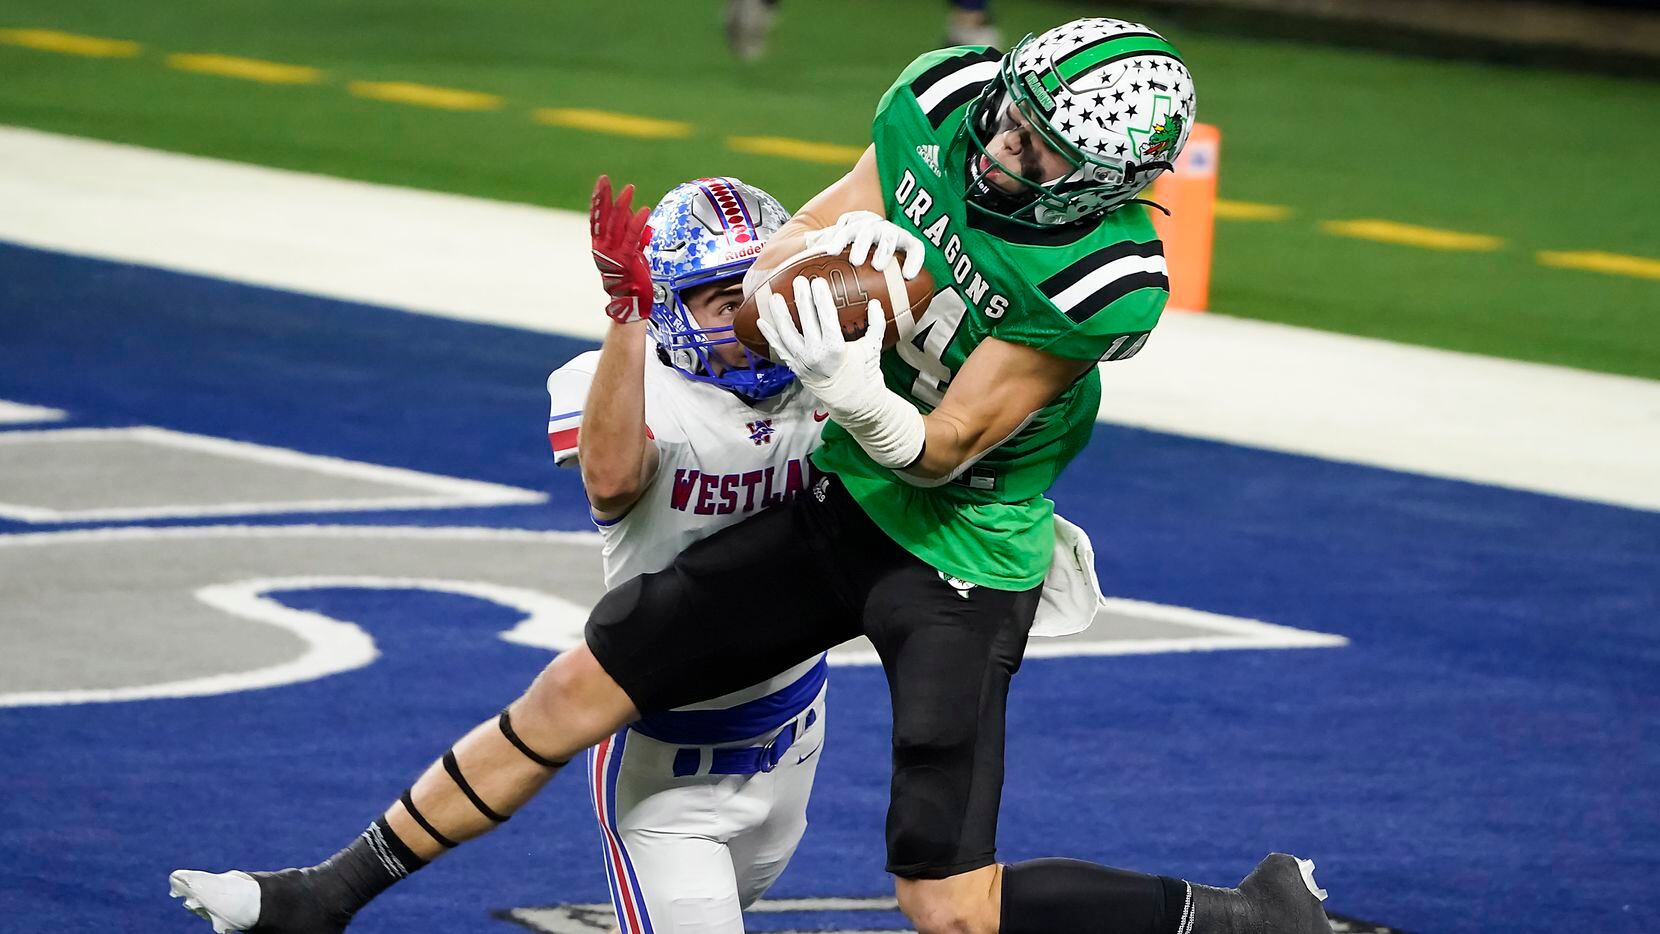 Southlake Carroll wide receiver Brady Boyd (14) catches a 27-yard touchdown pass as Austin Westlake defensive back Jax Crockett (4) defends during the second quarter of the Class 6A Division I state football championship game at AT&T Stadium on Saturday, Jan. 16, 2021, in Arlington, Texas.